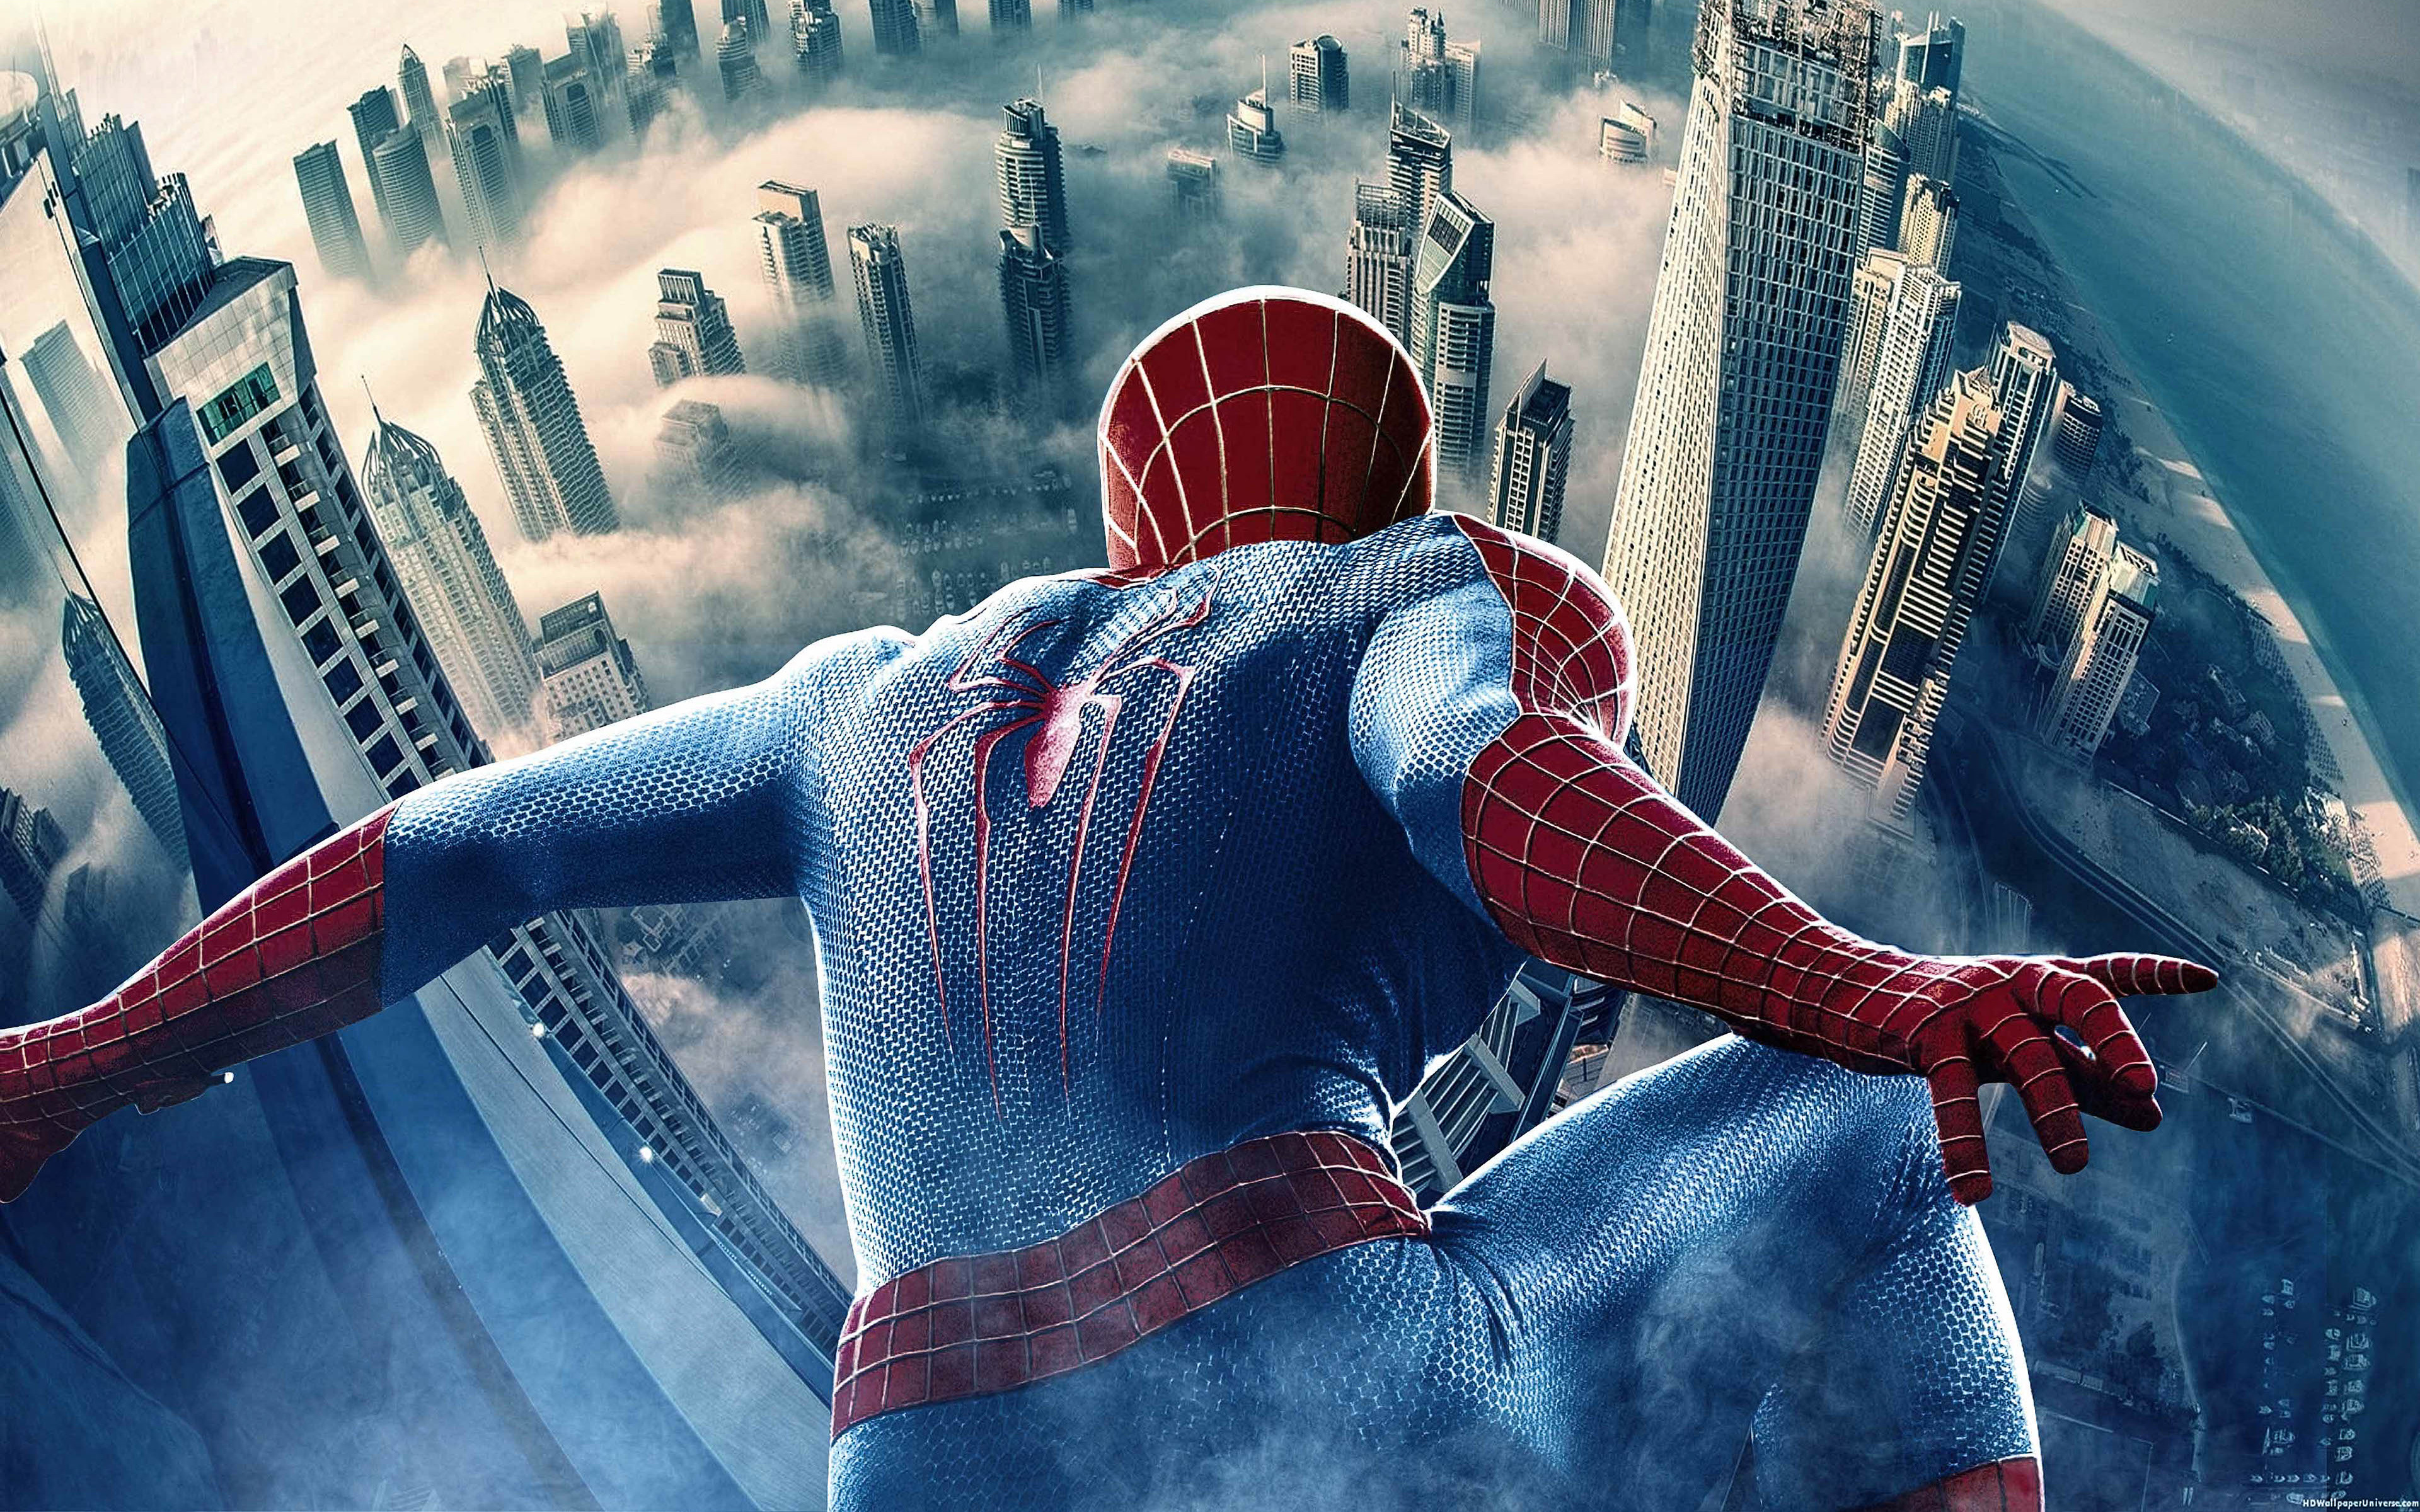 the amazing spider man 2 free download pc